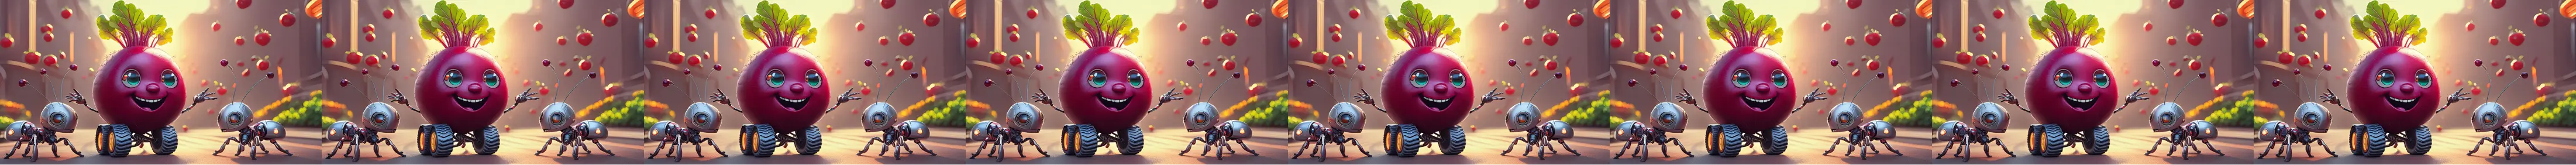 Banner showing robot ants interacting with a beetroot that itself has robotic wheels and robotic arms. The image is repeated several times. Artistic image was AI generated via Adobe Firefly.